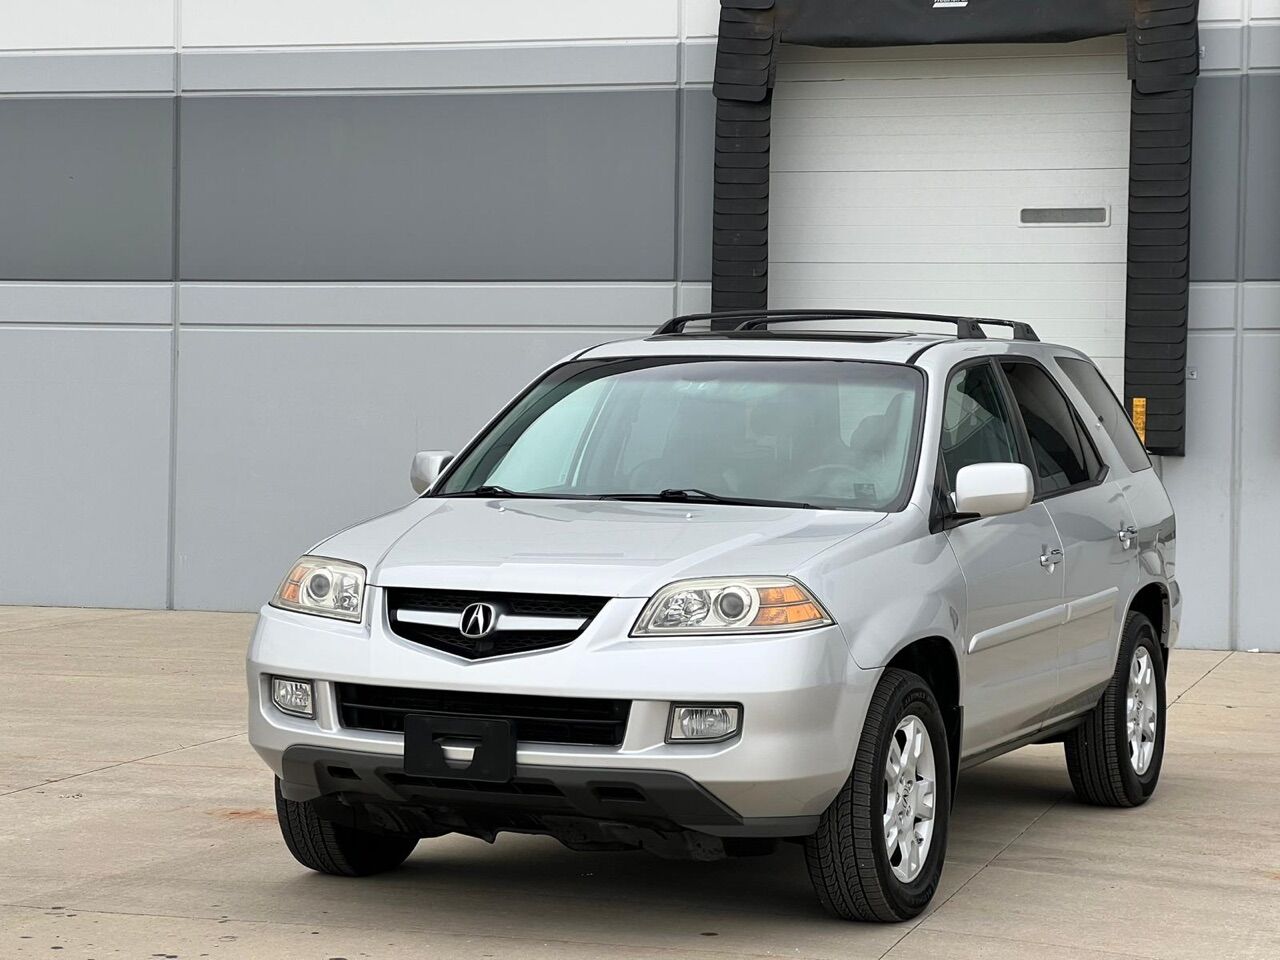 2005 Acura MDX For Sale - Carsforsale.com®